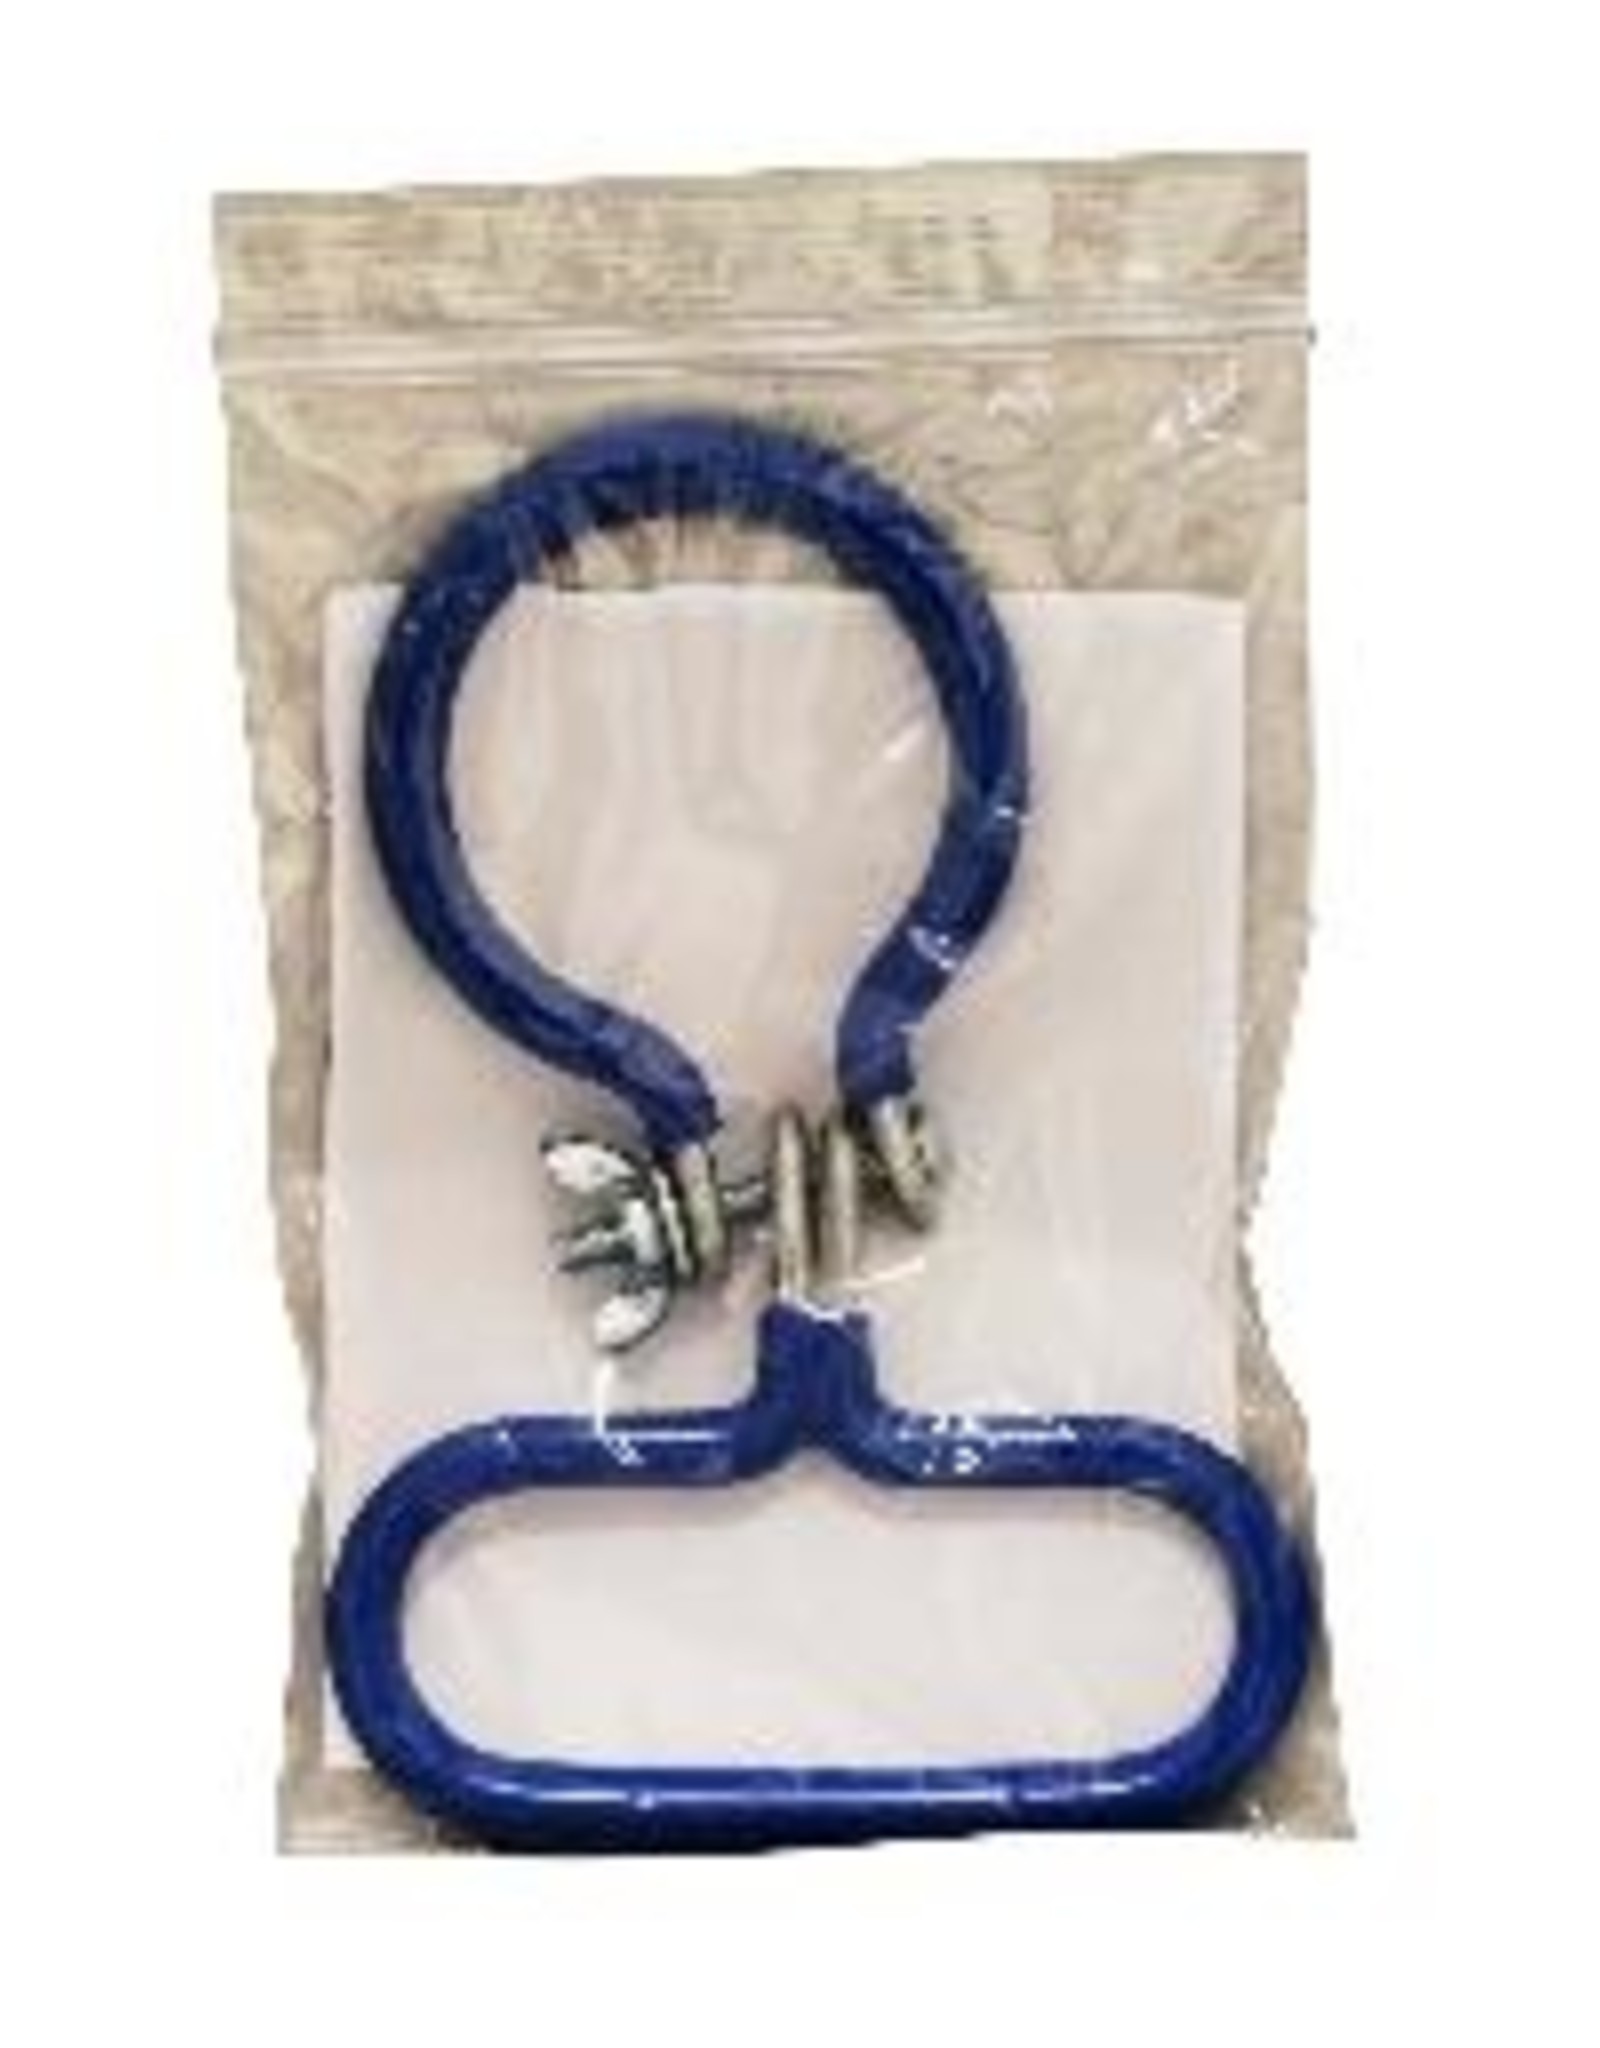 BLUE CARBOY HANDLE FOR 6.5 GALLON CARBOY